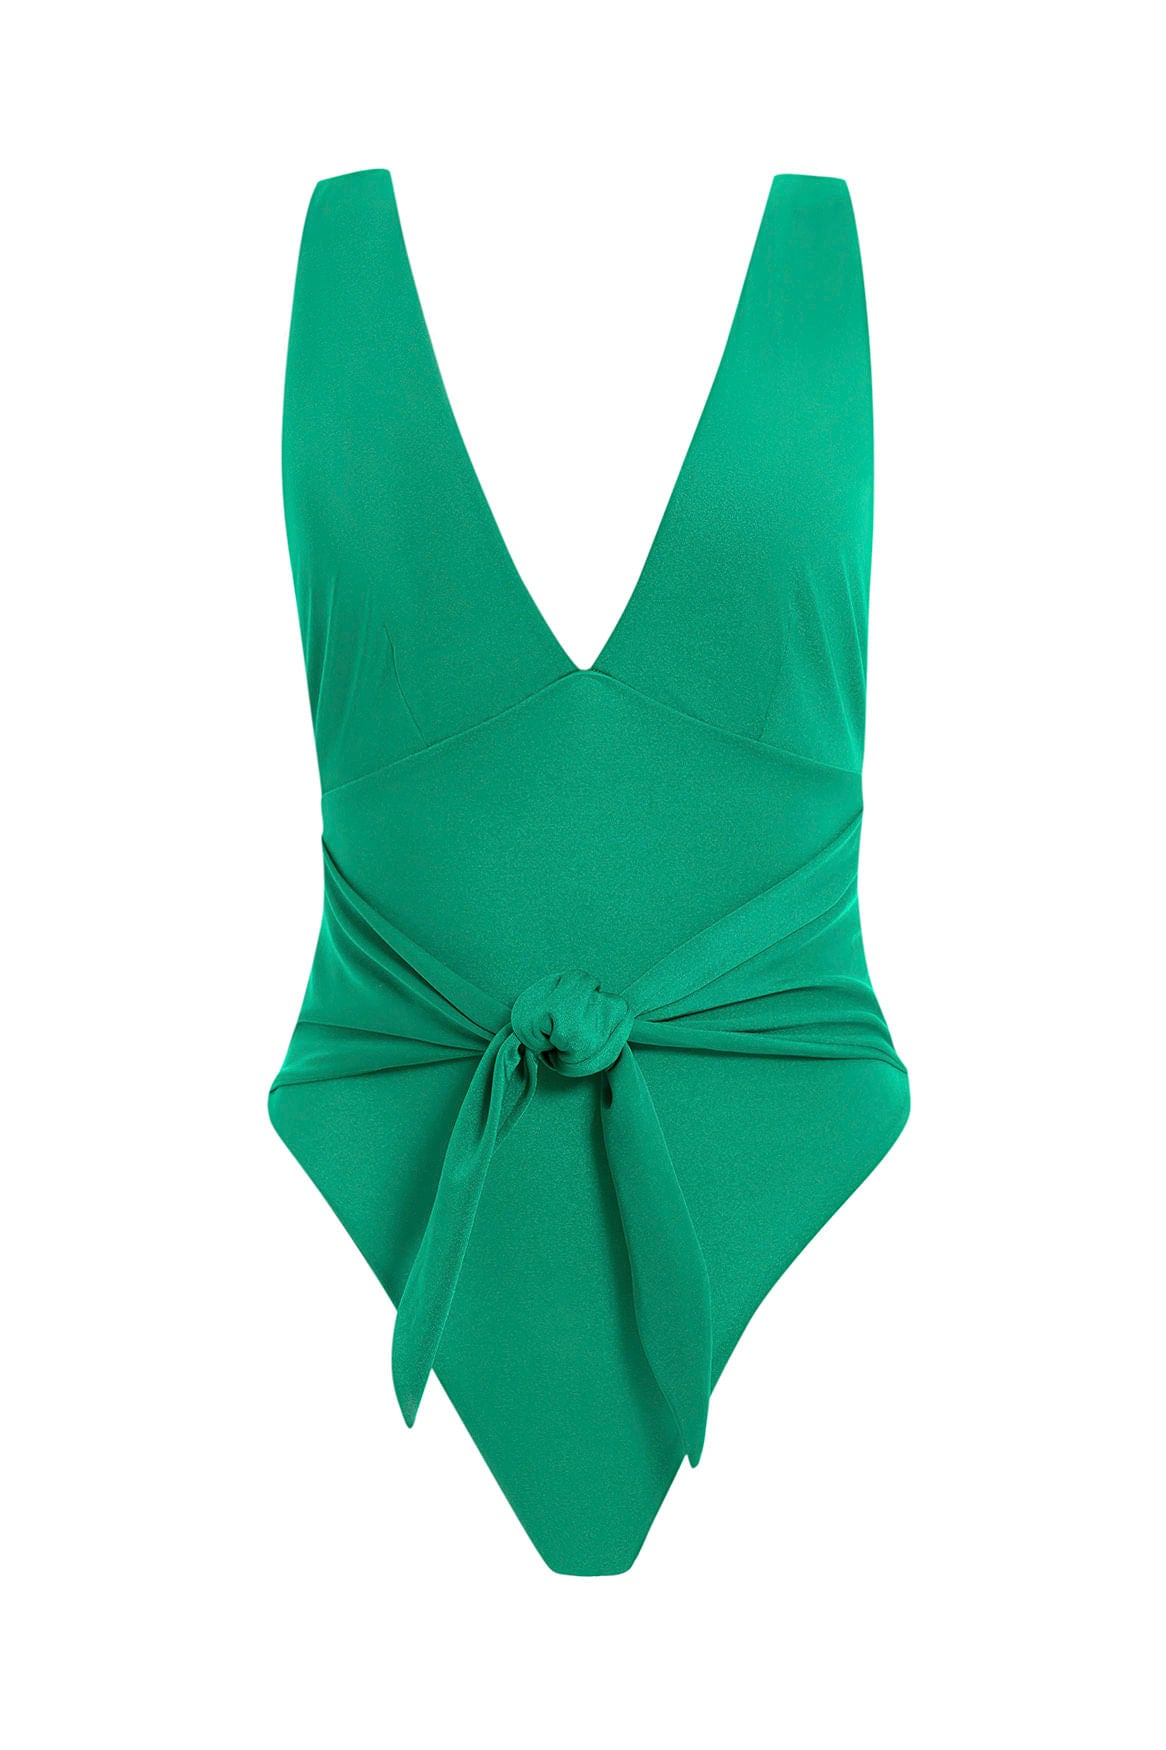 Green Plunging V-Neck Latin Cut One Piece